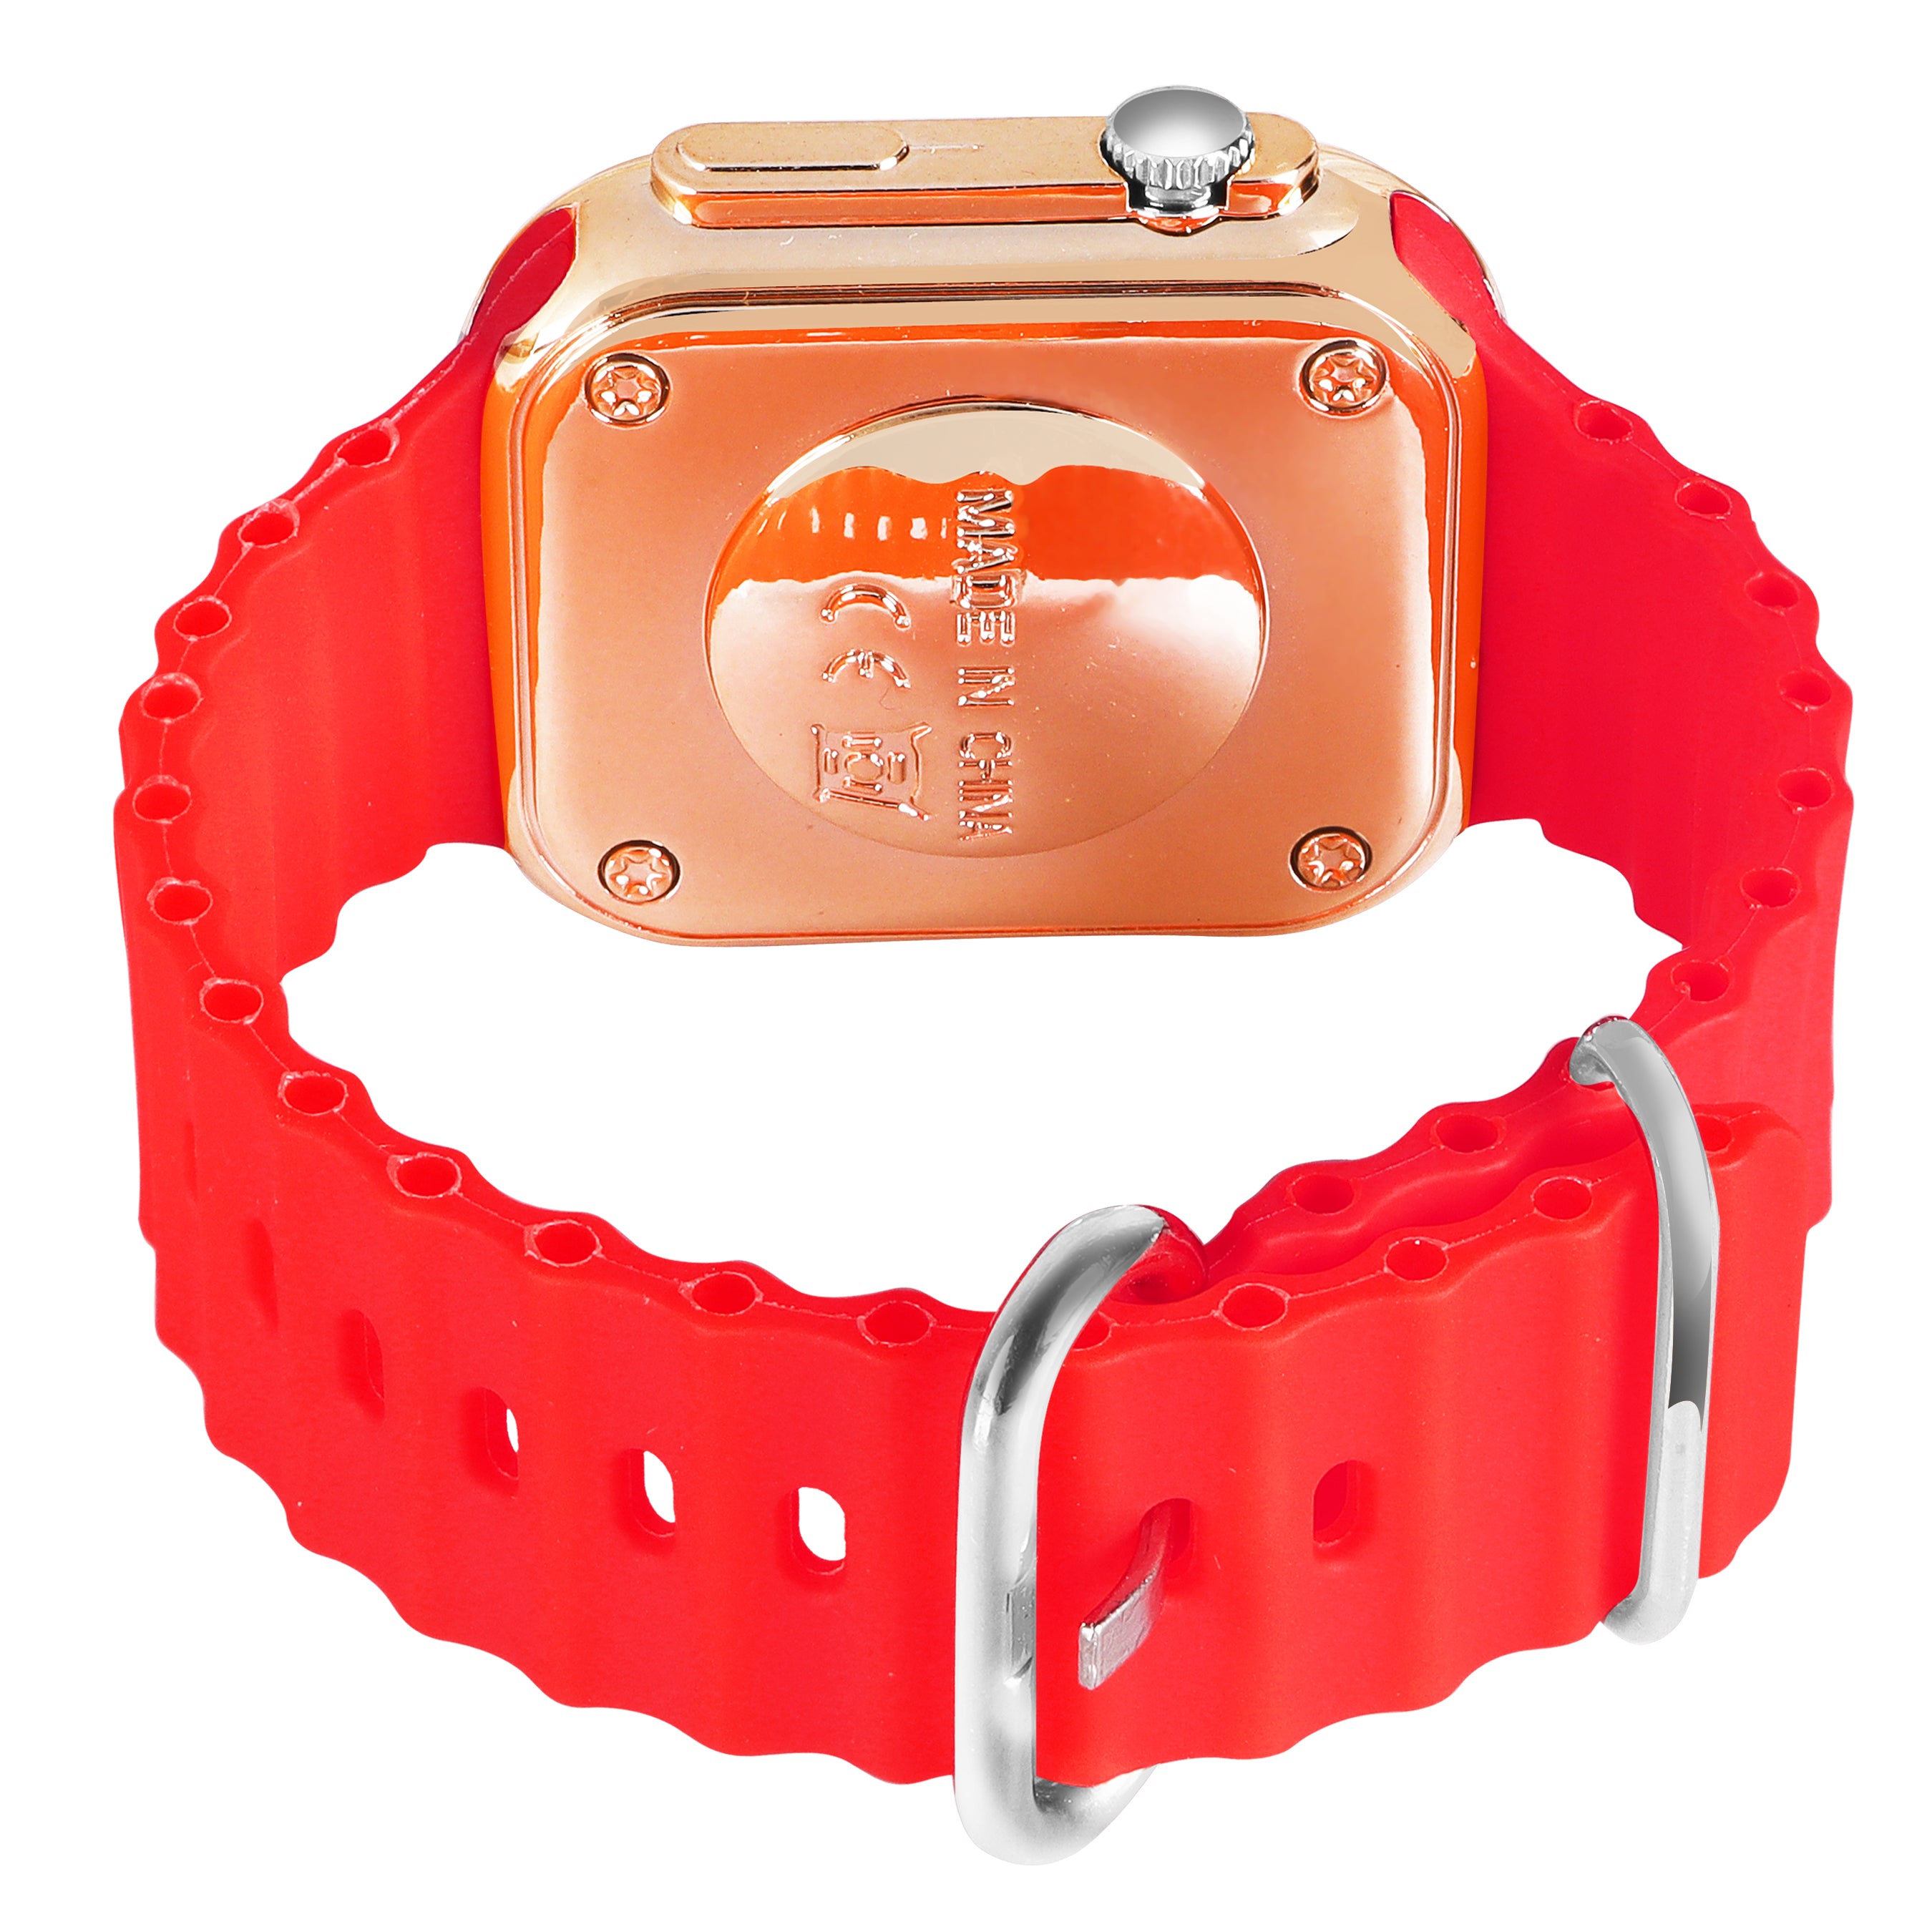 LOIS CARON D-1035 Teenagers LED Luxurious Fashion Silicone Red Colored Digital Watch - For Boys & Girls